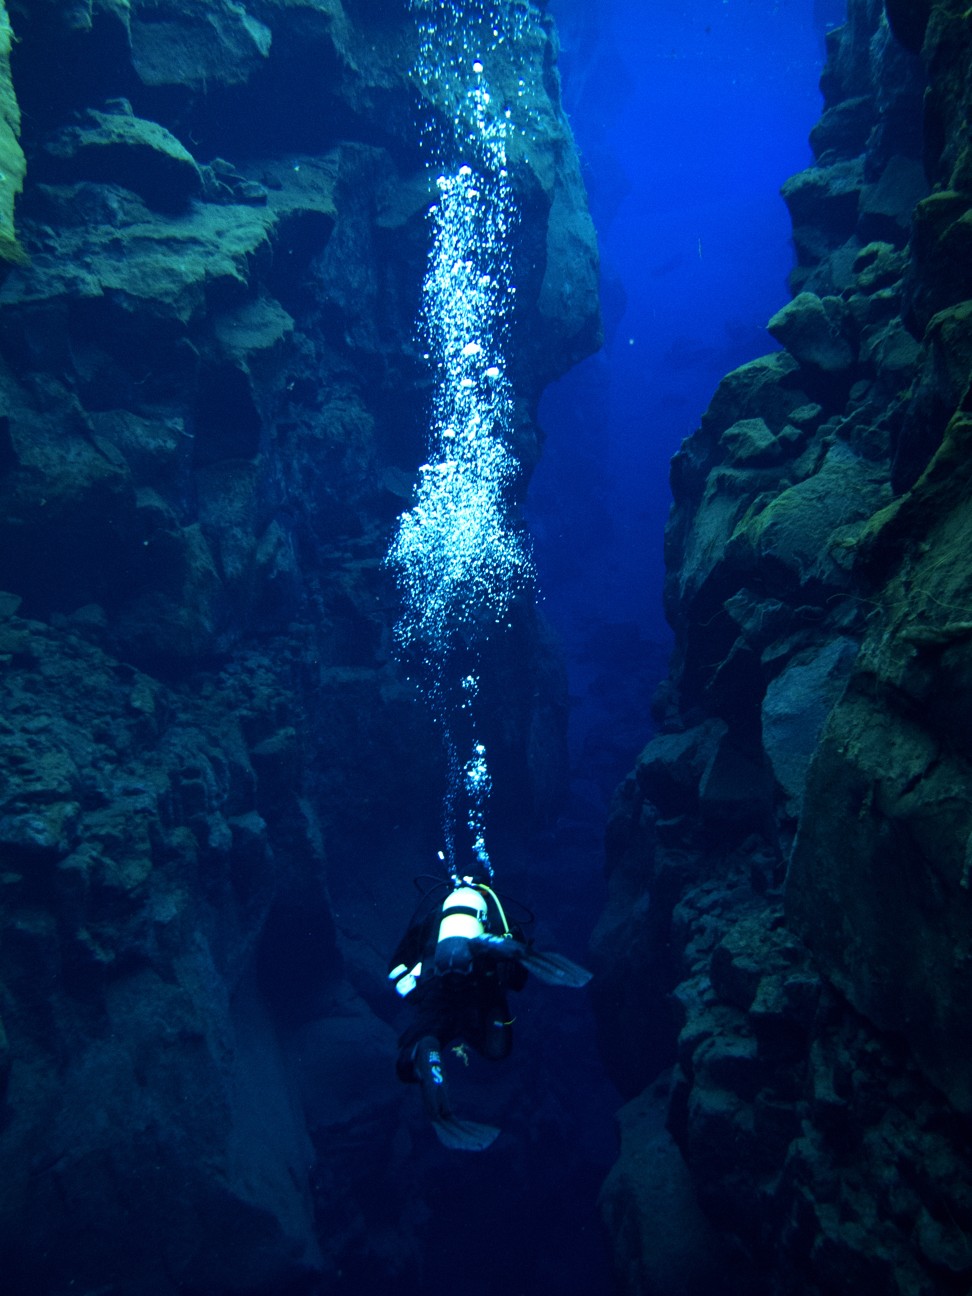 Scuba Diving at Silfra Fissure, Iceland is fascinating. This Unesco World Heritage Site is situated in Thingvellir National Park.